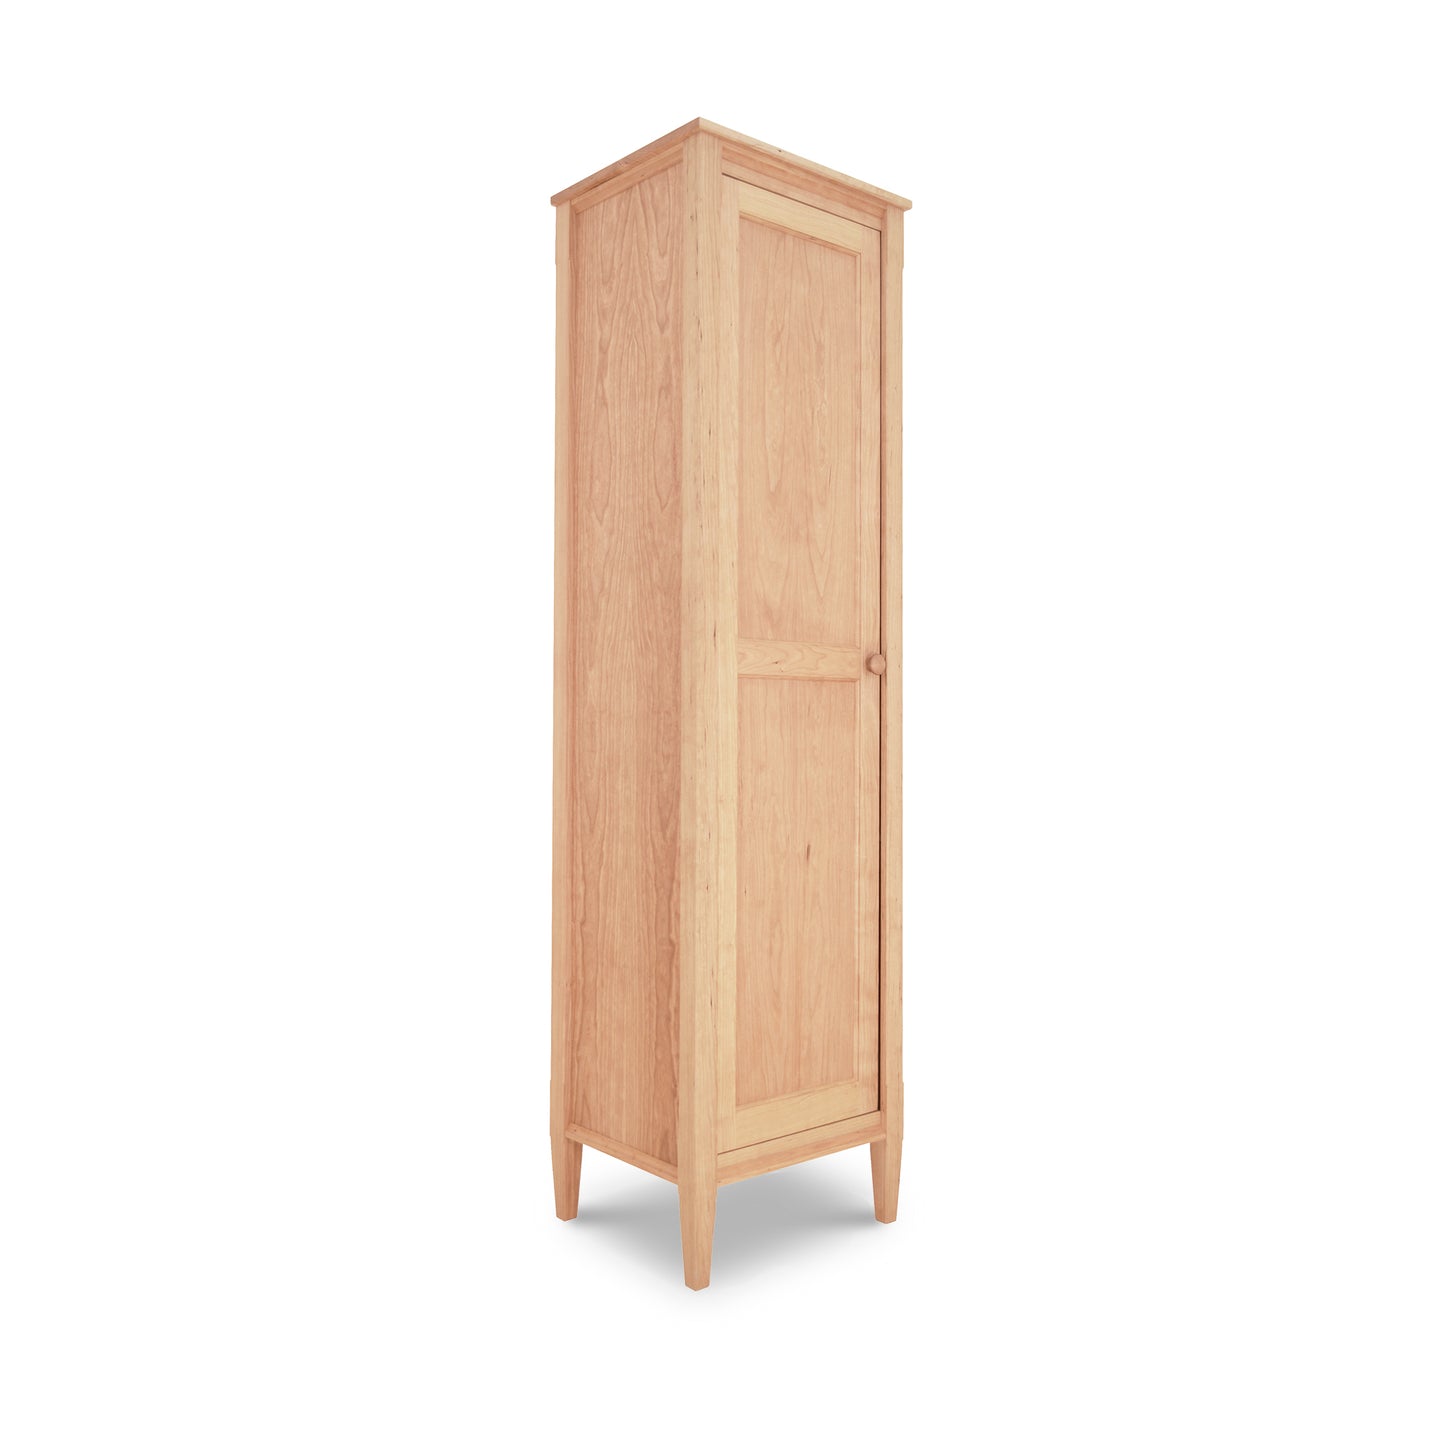 A tall wooden Vermont Shaker Narrow Bookcase with Mirror, crafted from sustainably harvested woods by Maple Corner Woodworks, with a single closed door, standing on four legs, isolated against a white background.